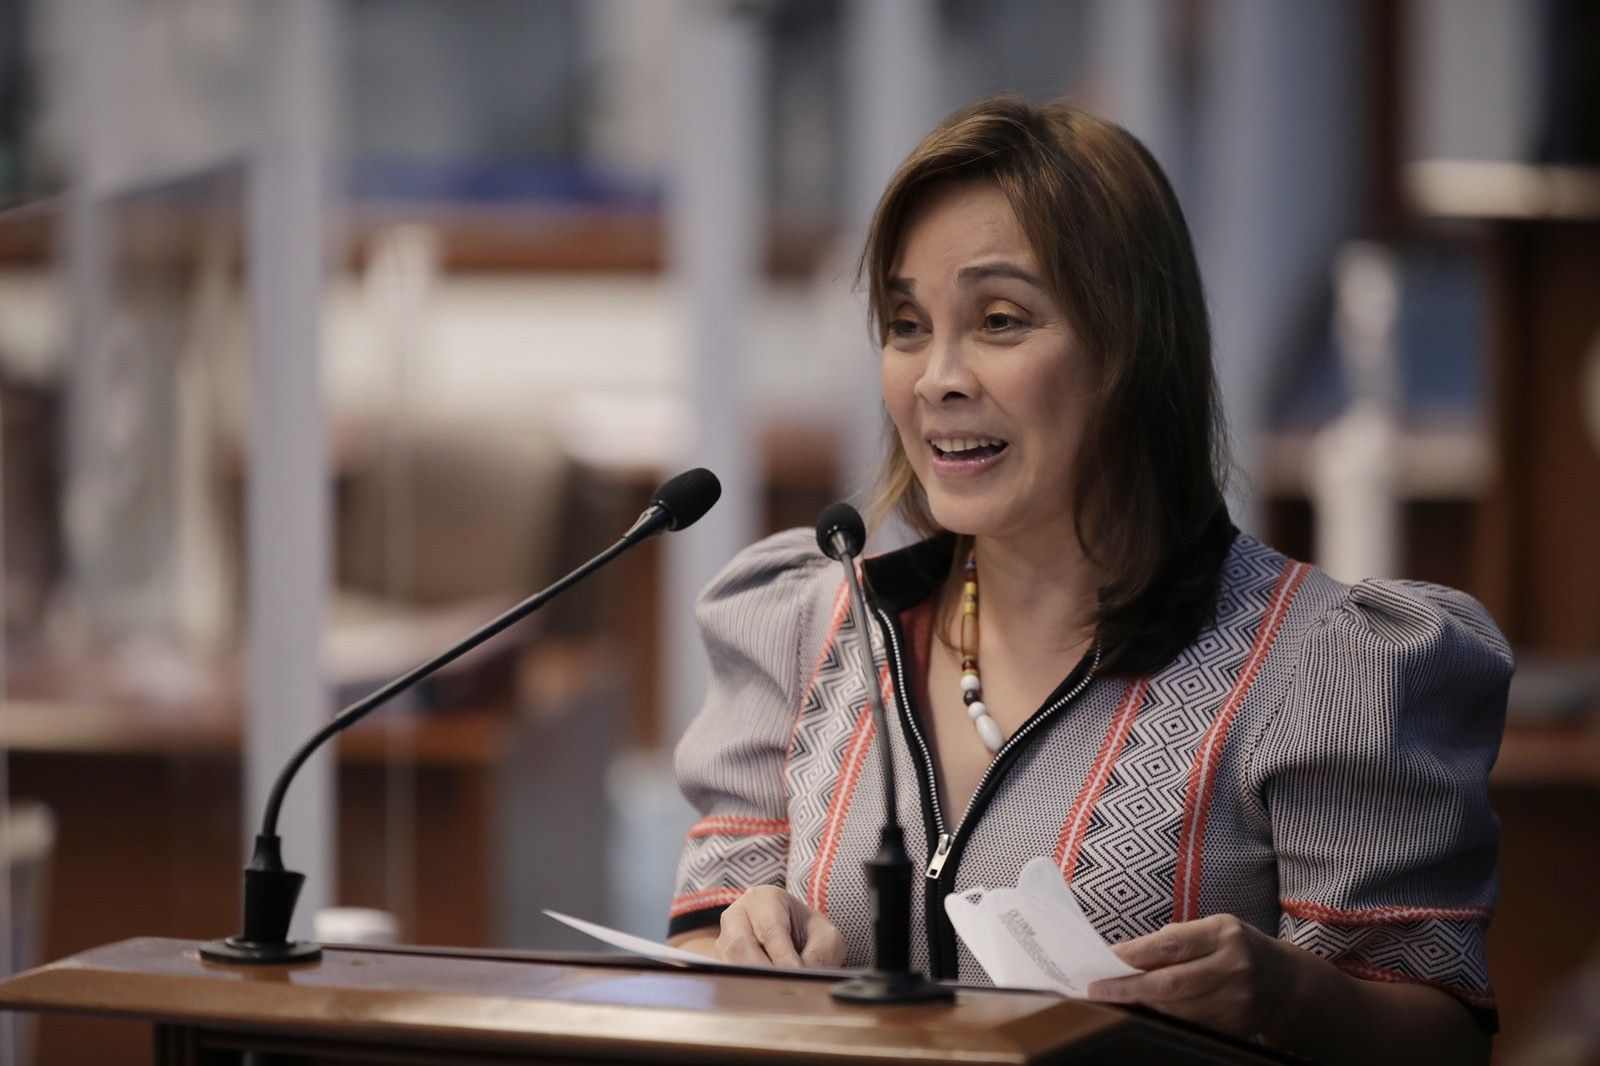 After saying nothing wrong with working with the left, Legarda condemns terrorism